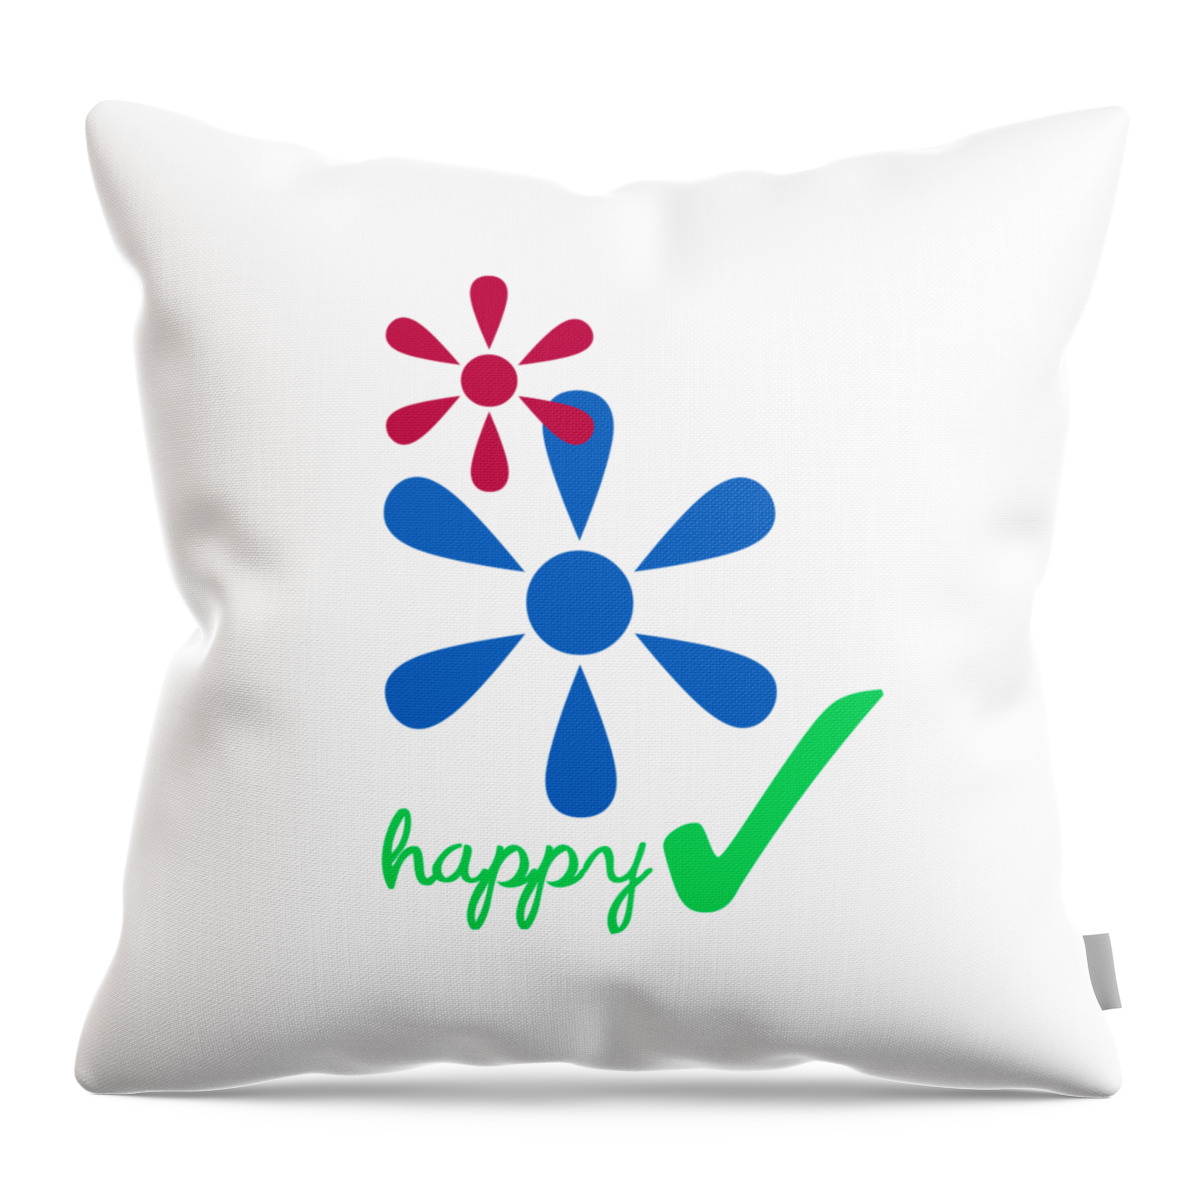 Ts003 Throw Pillow featuring the digital art Happy by Edmund Nagele FRPS